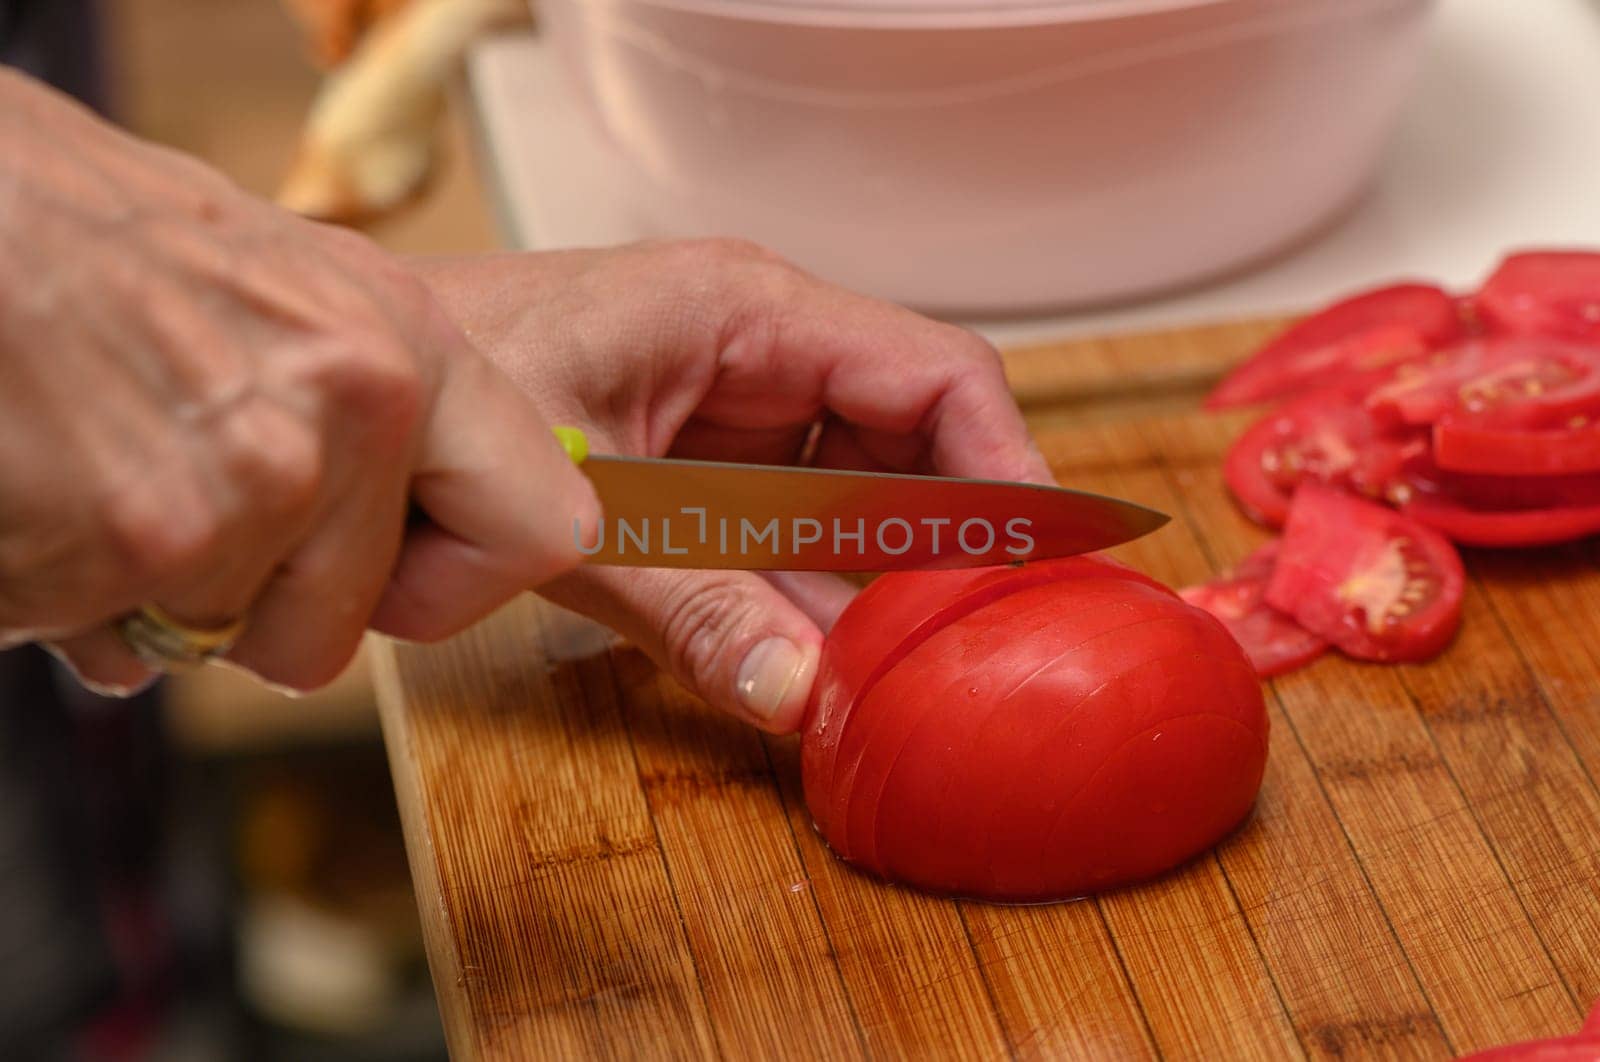 woman cutting tomato on kitchen board 3 by Mixa74